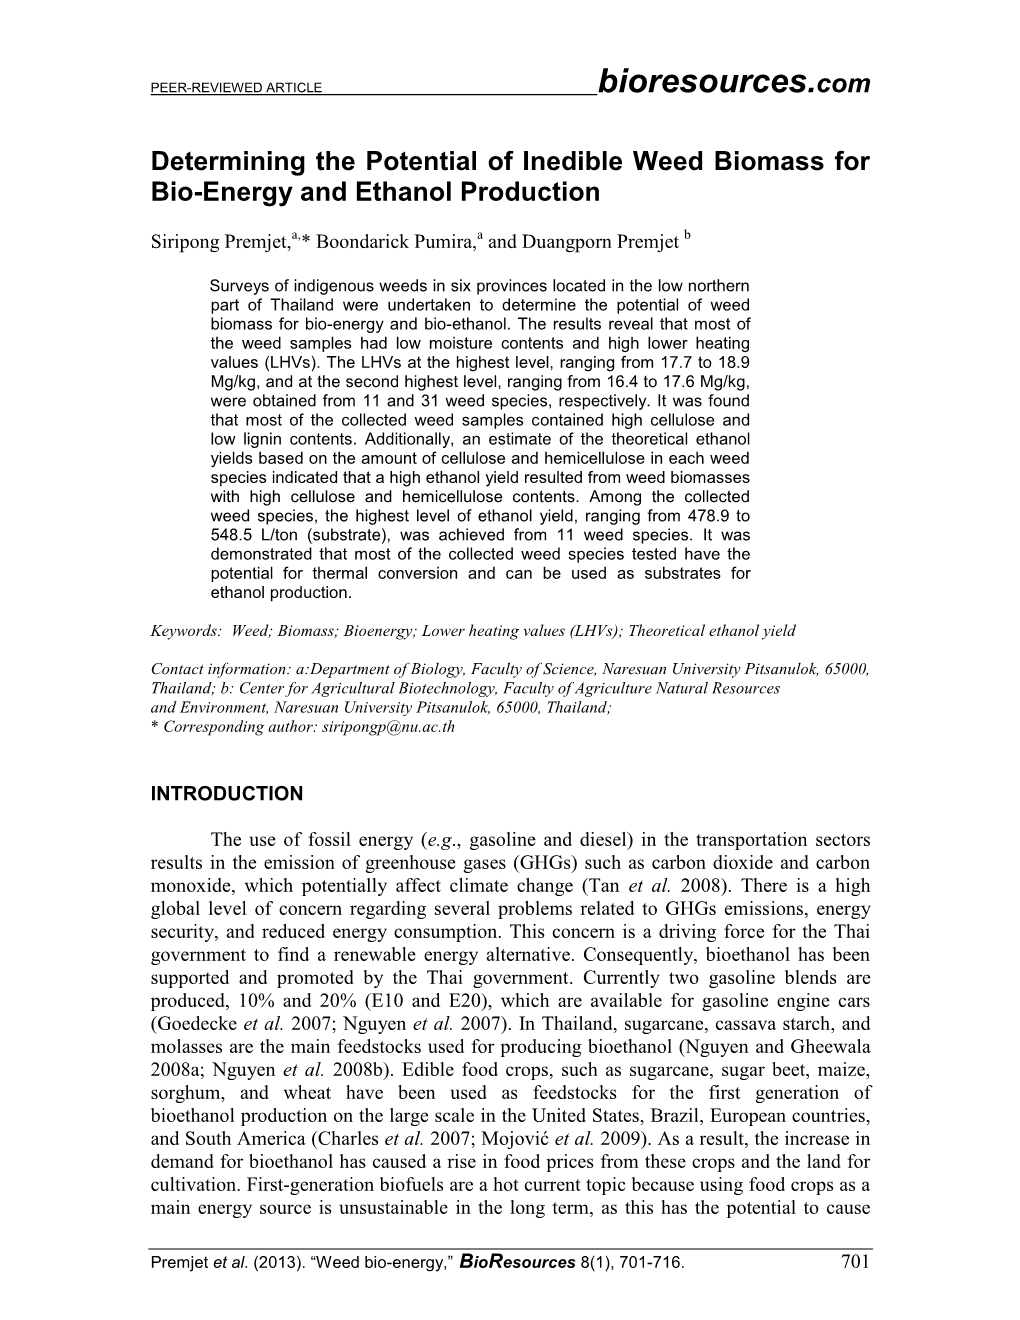 Determining the Potential of Inedible Weed Biomass for Bio-Energy and Ethanol Production